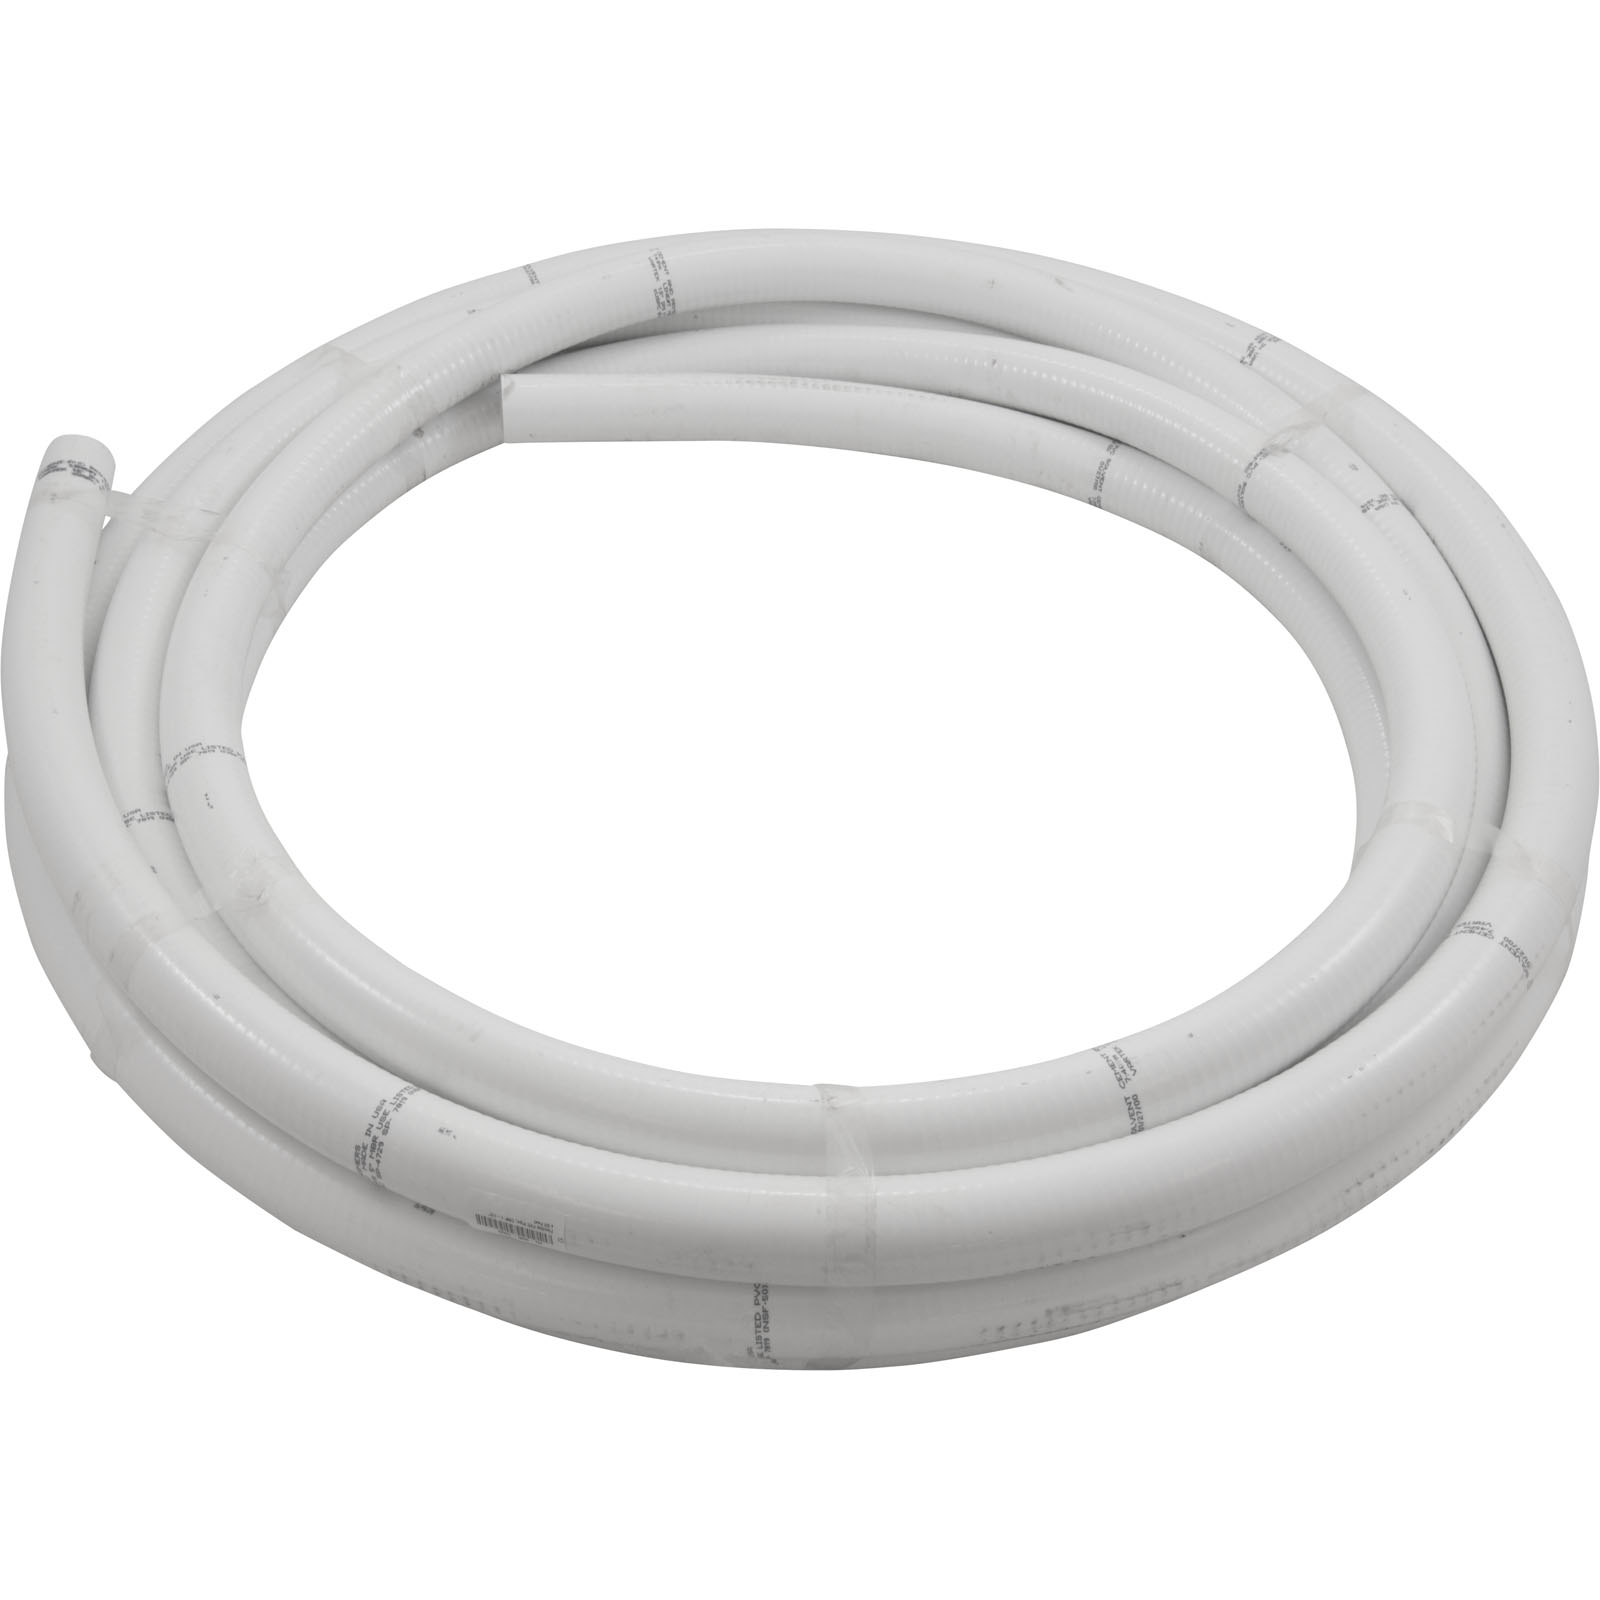 Picture of 22015-050-000 Flexible PVC Pipe CMP 1-1/2" x 50 Feet